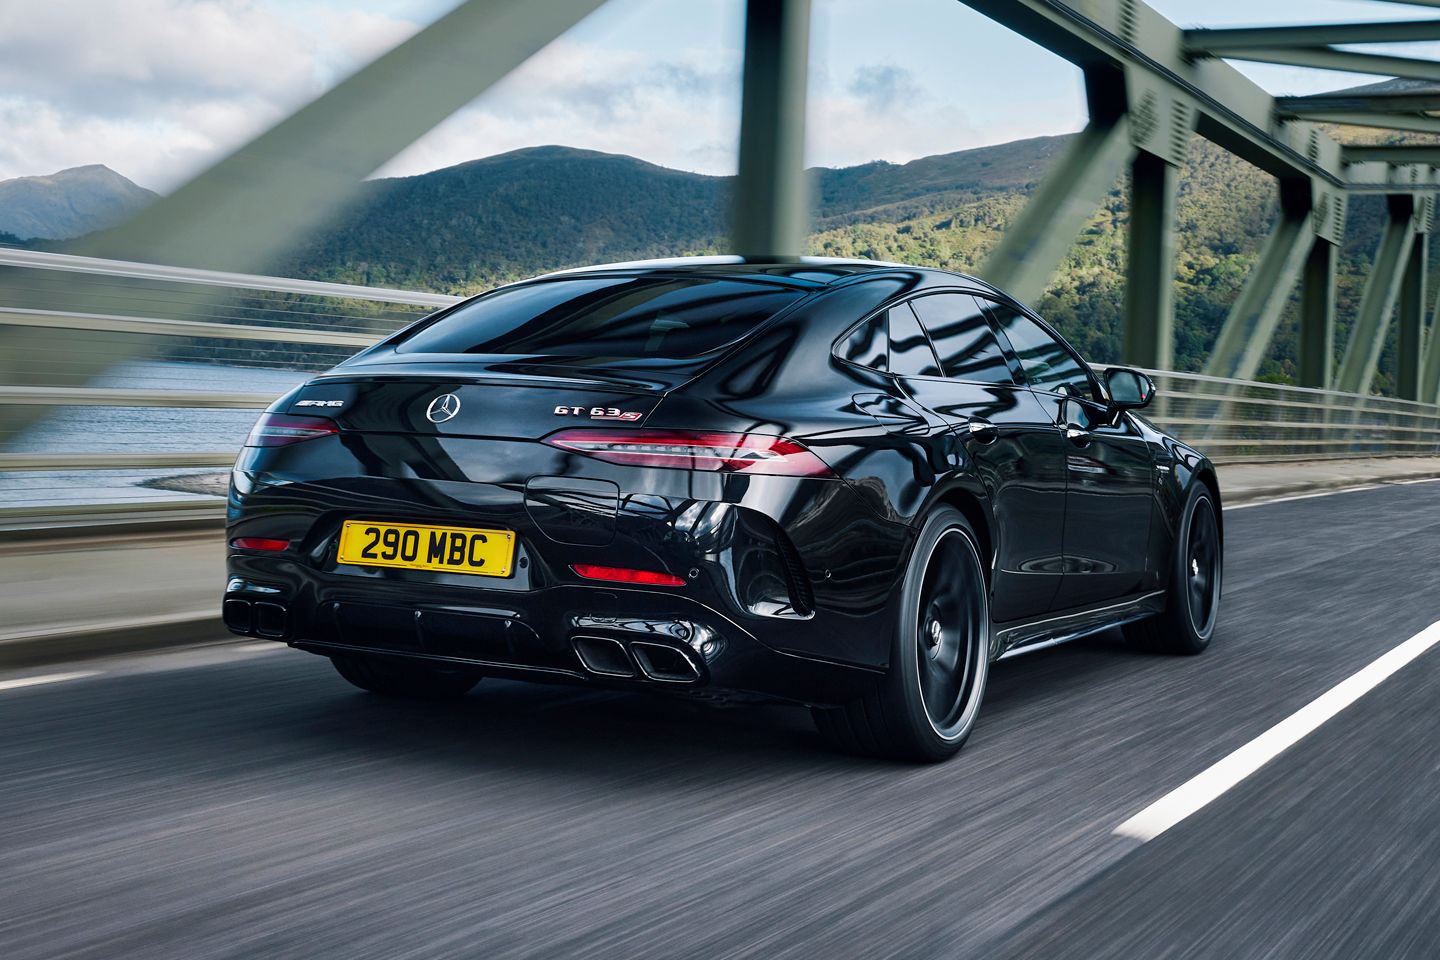 Mercedes amg Gt 63 S Mercedes-AMG GT 63 S E Performance | UK Review - PistonHeads UK